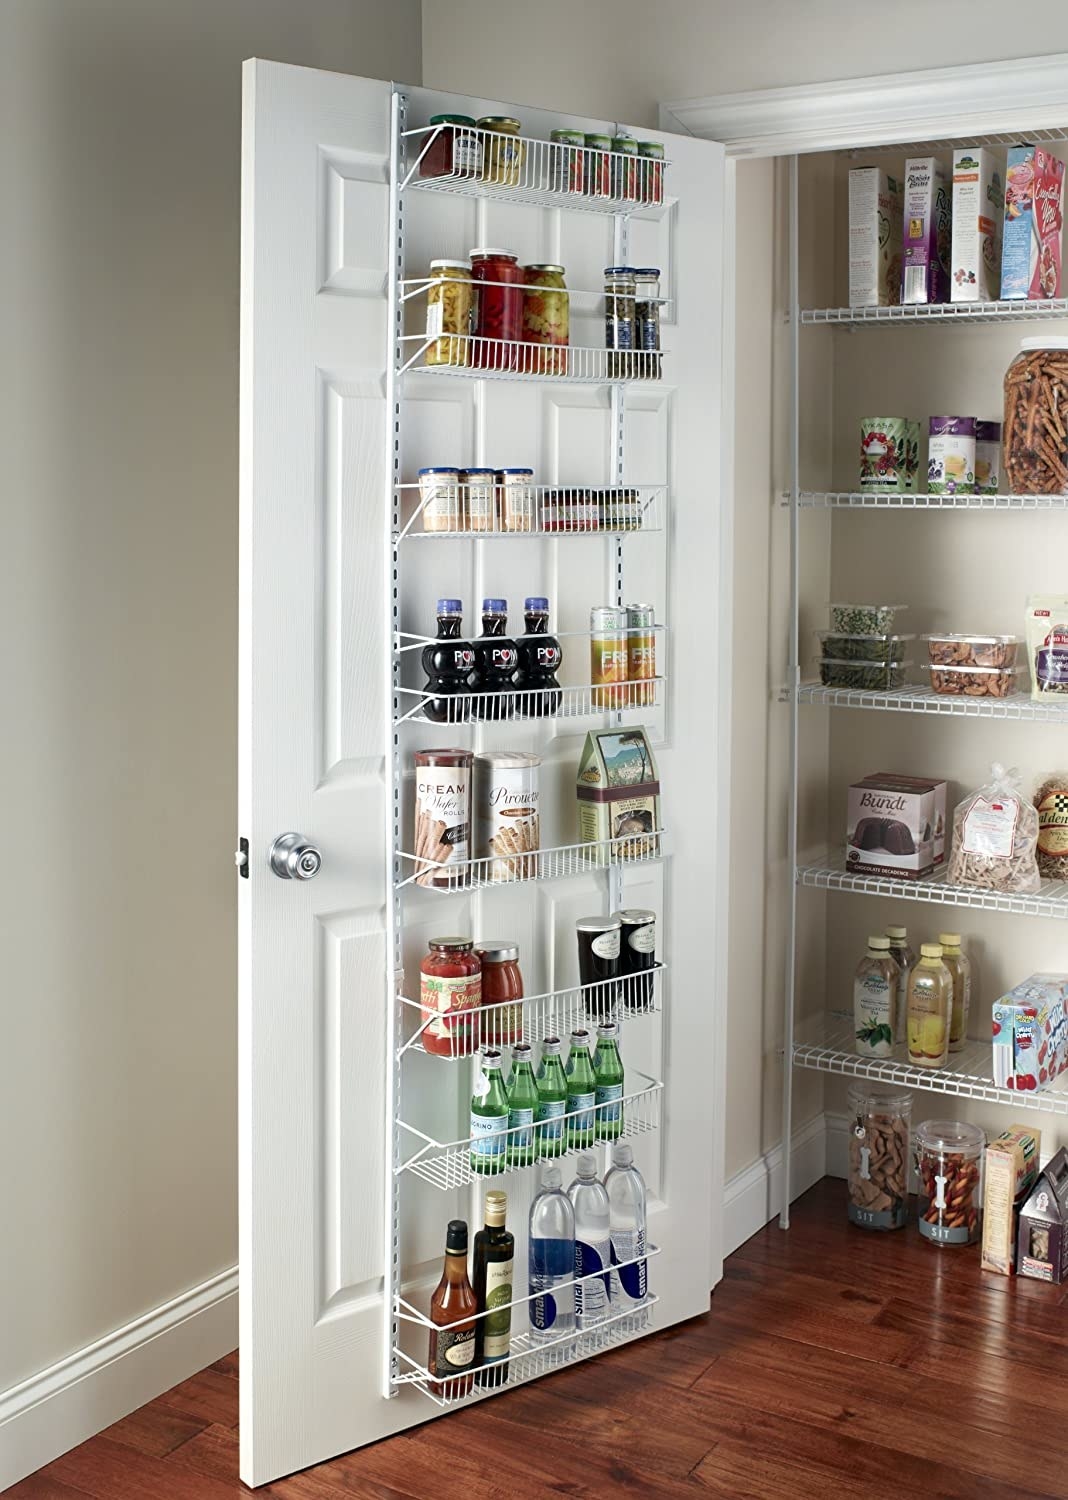 A ClosetMaid door hack hanging inside of a kitchen pantry